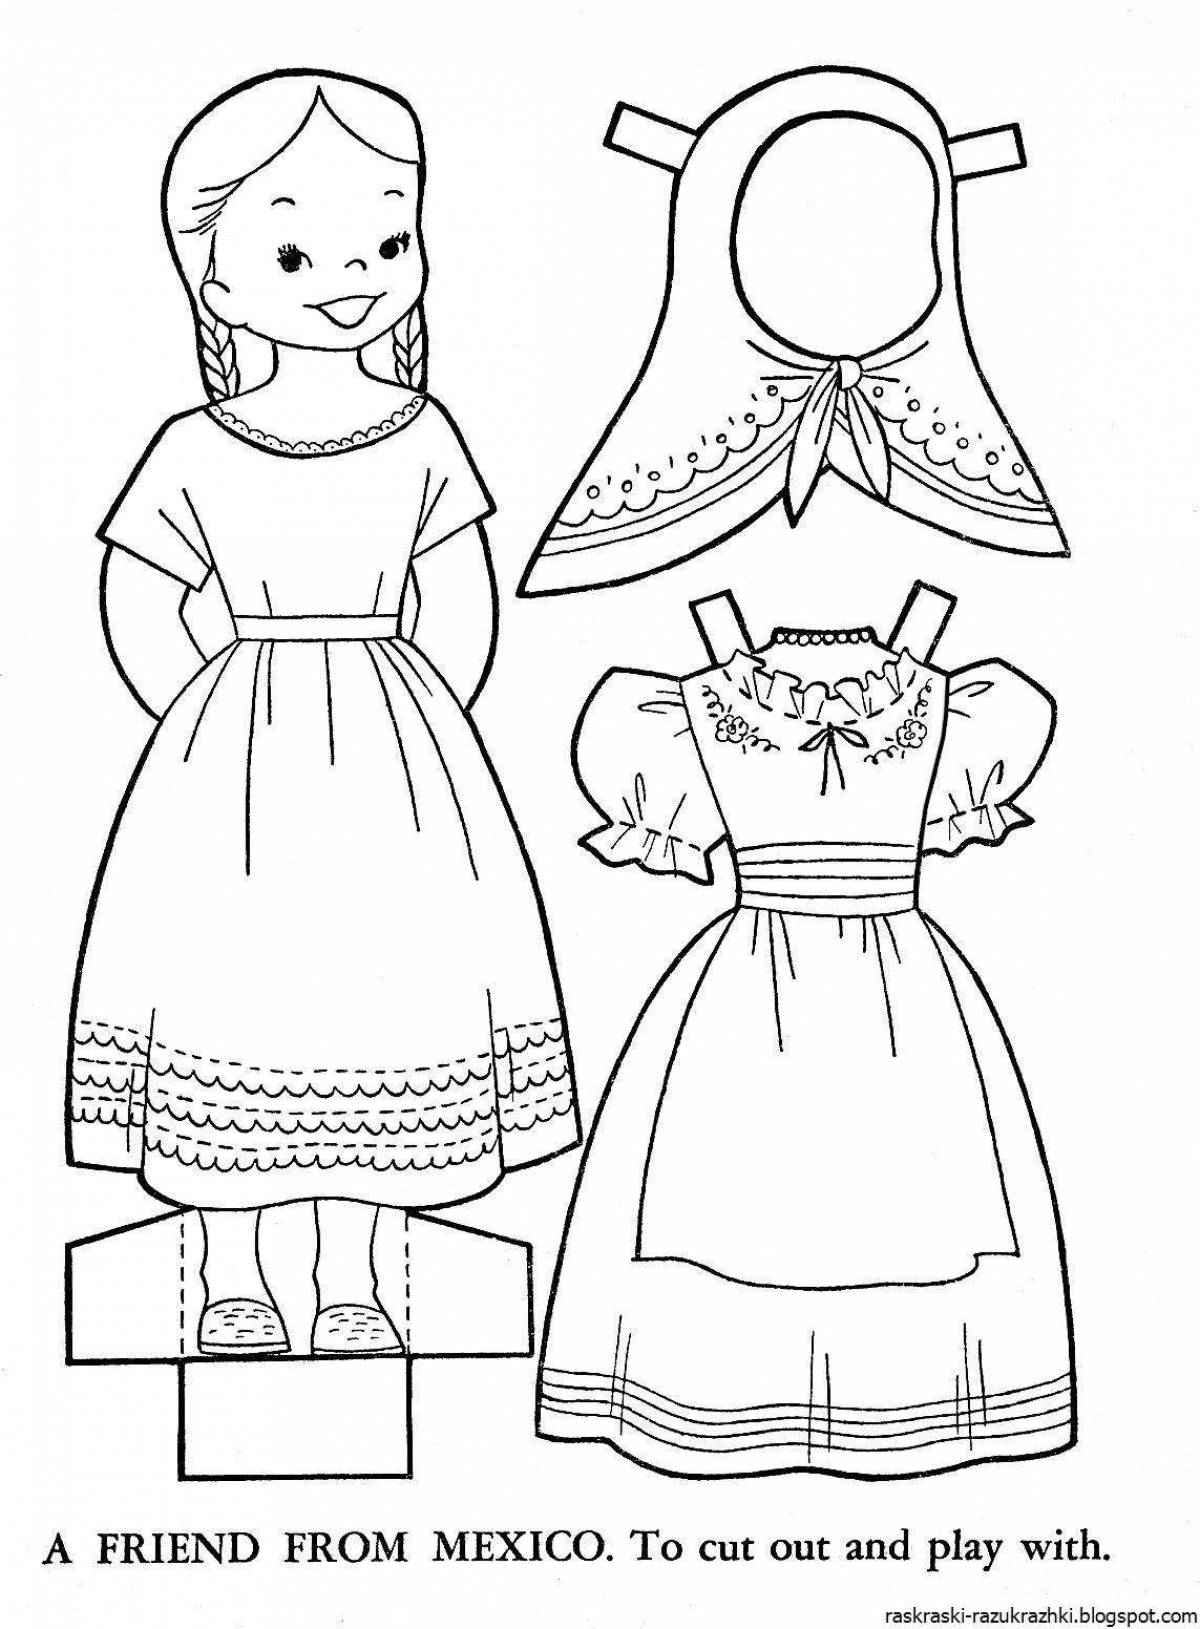 Gorgeous doll dress coloring page